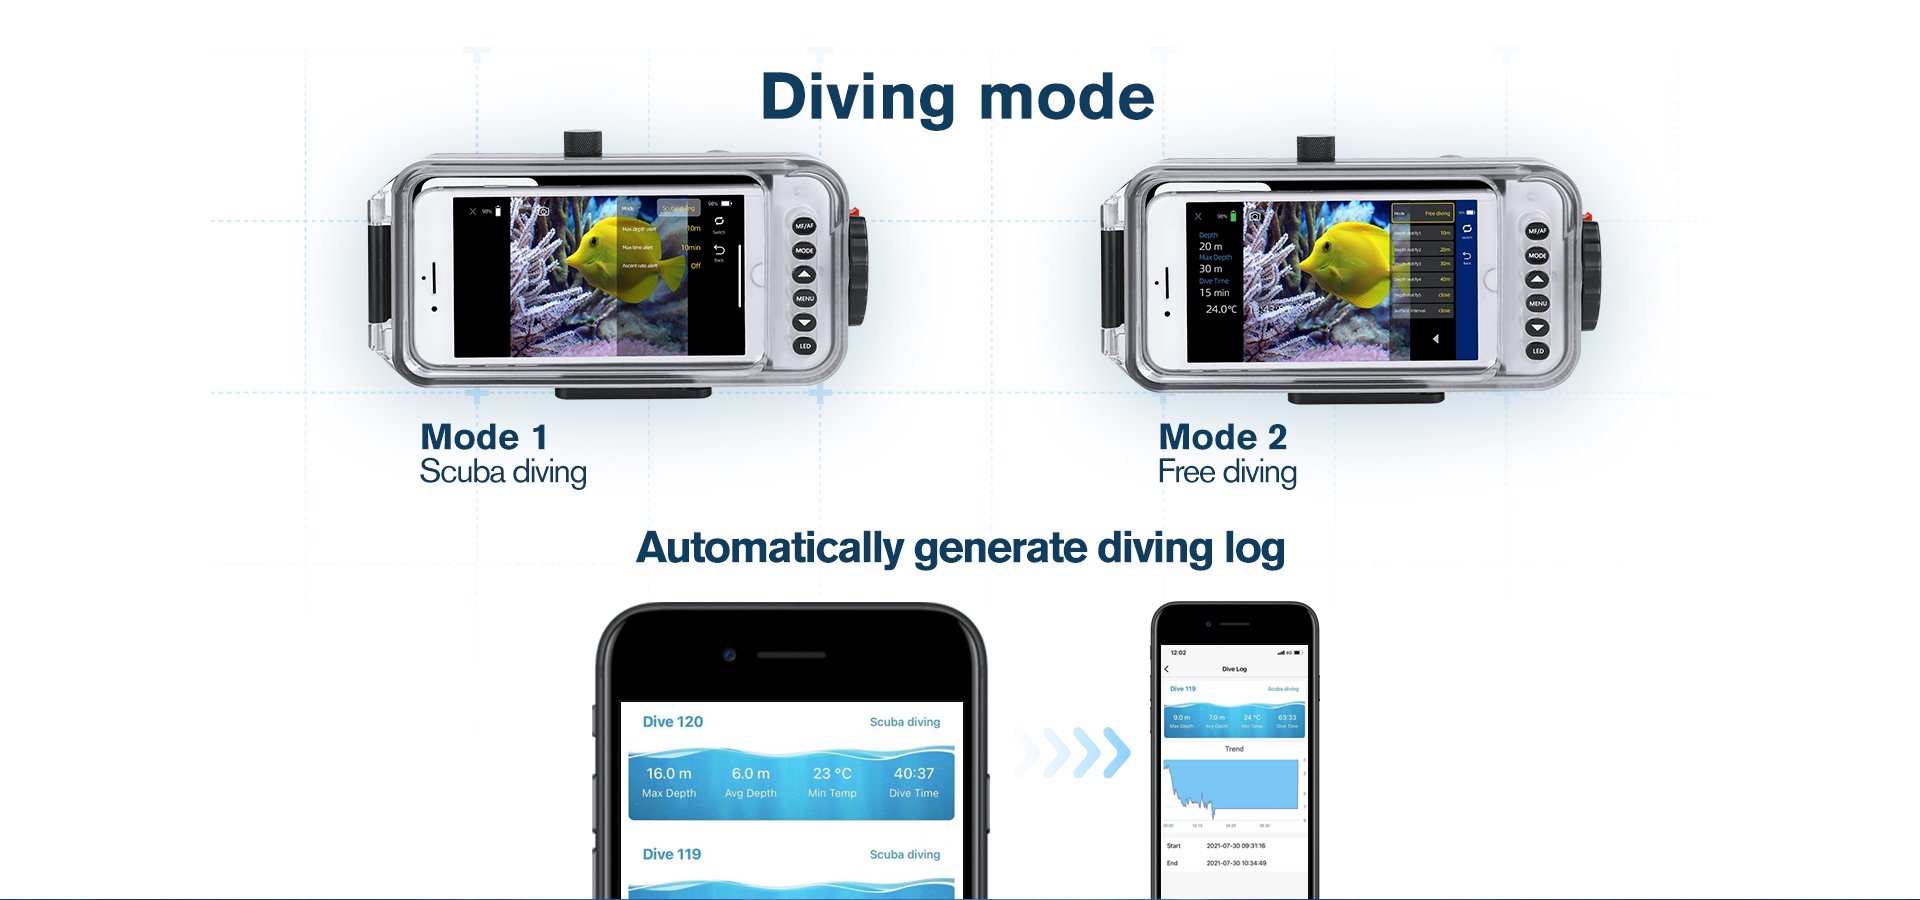 scuba diving and free diving modes